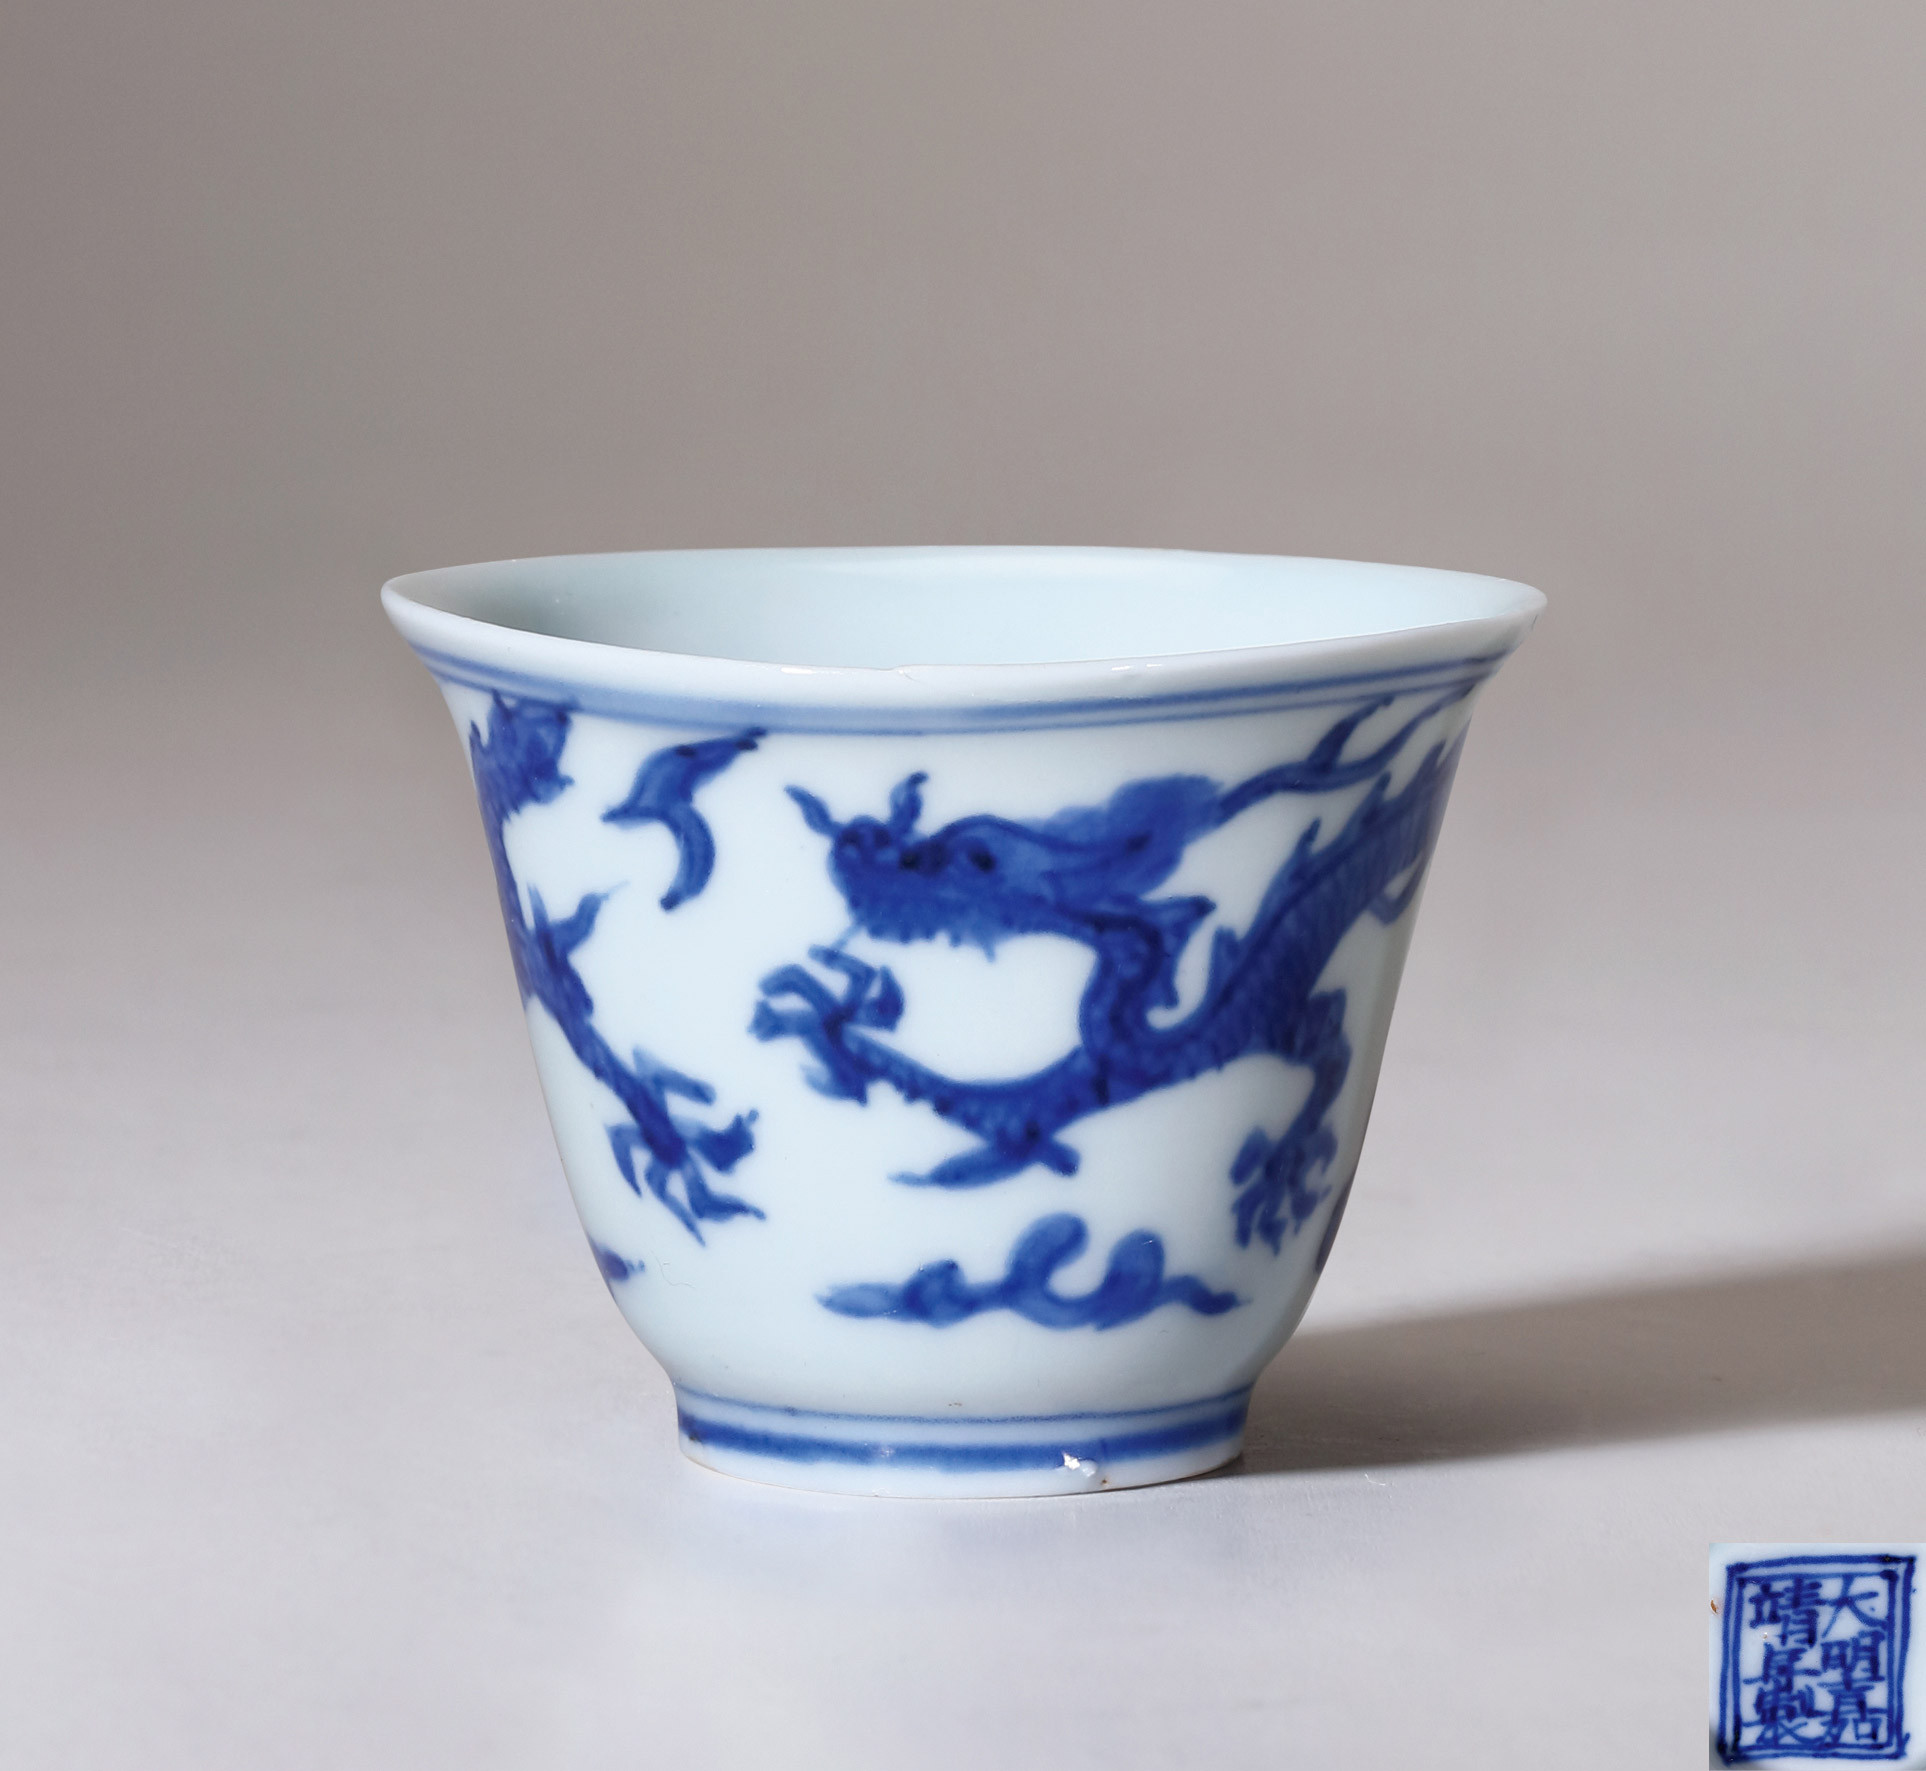 A RARE BLUE AND WHITE‘DRAGON’CUP